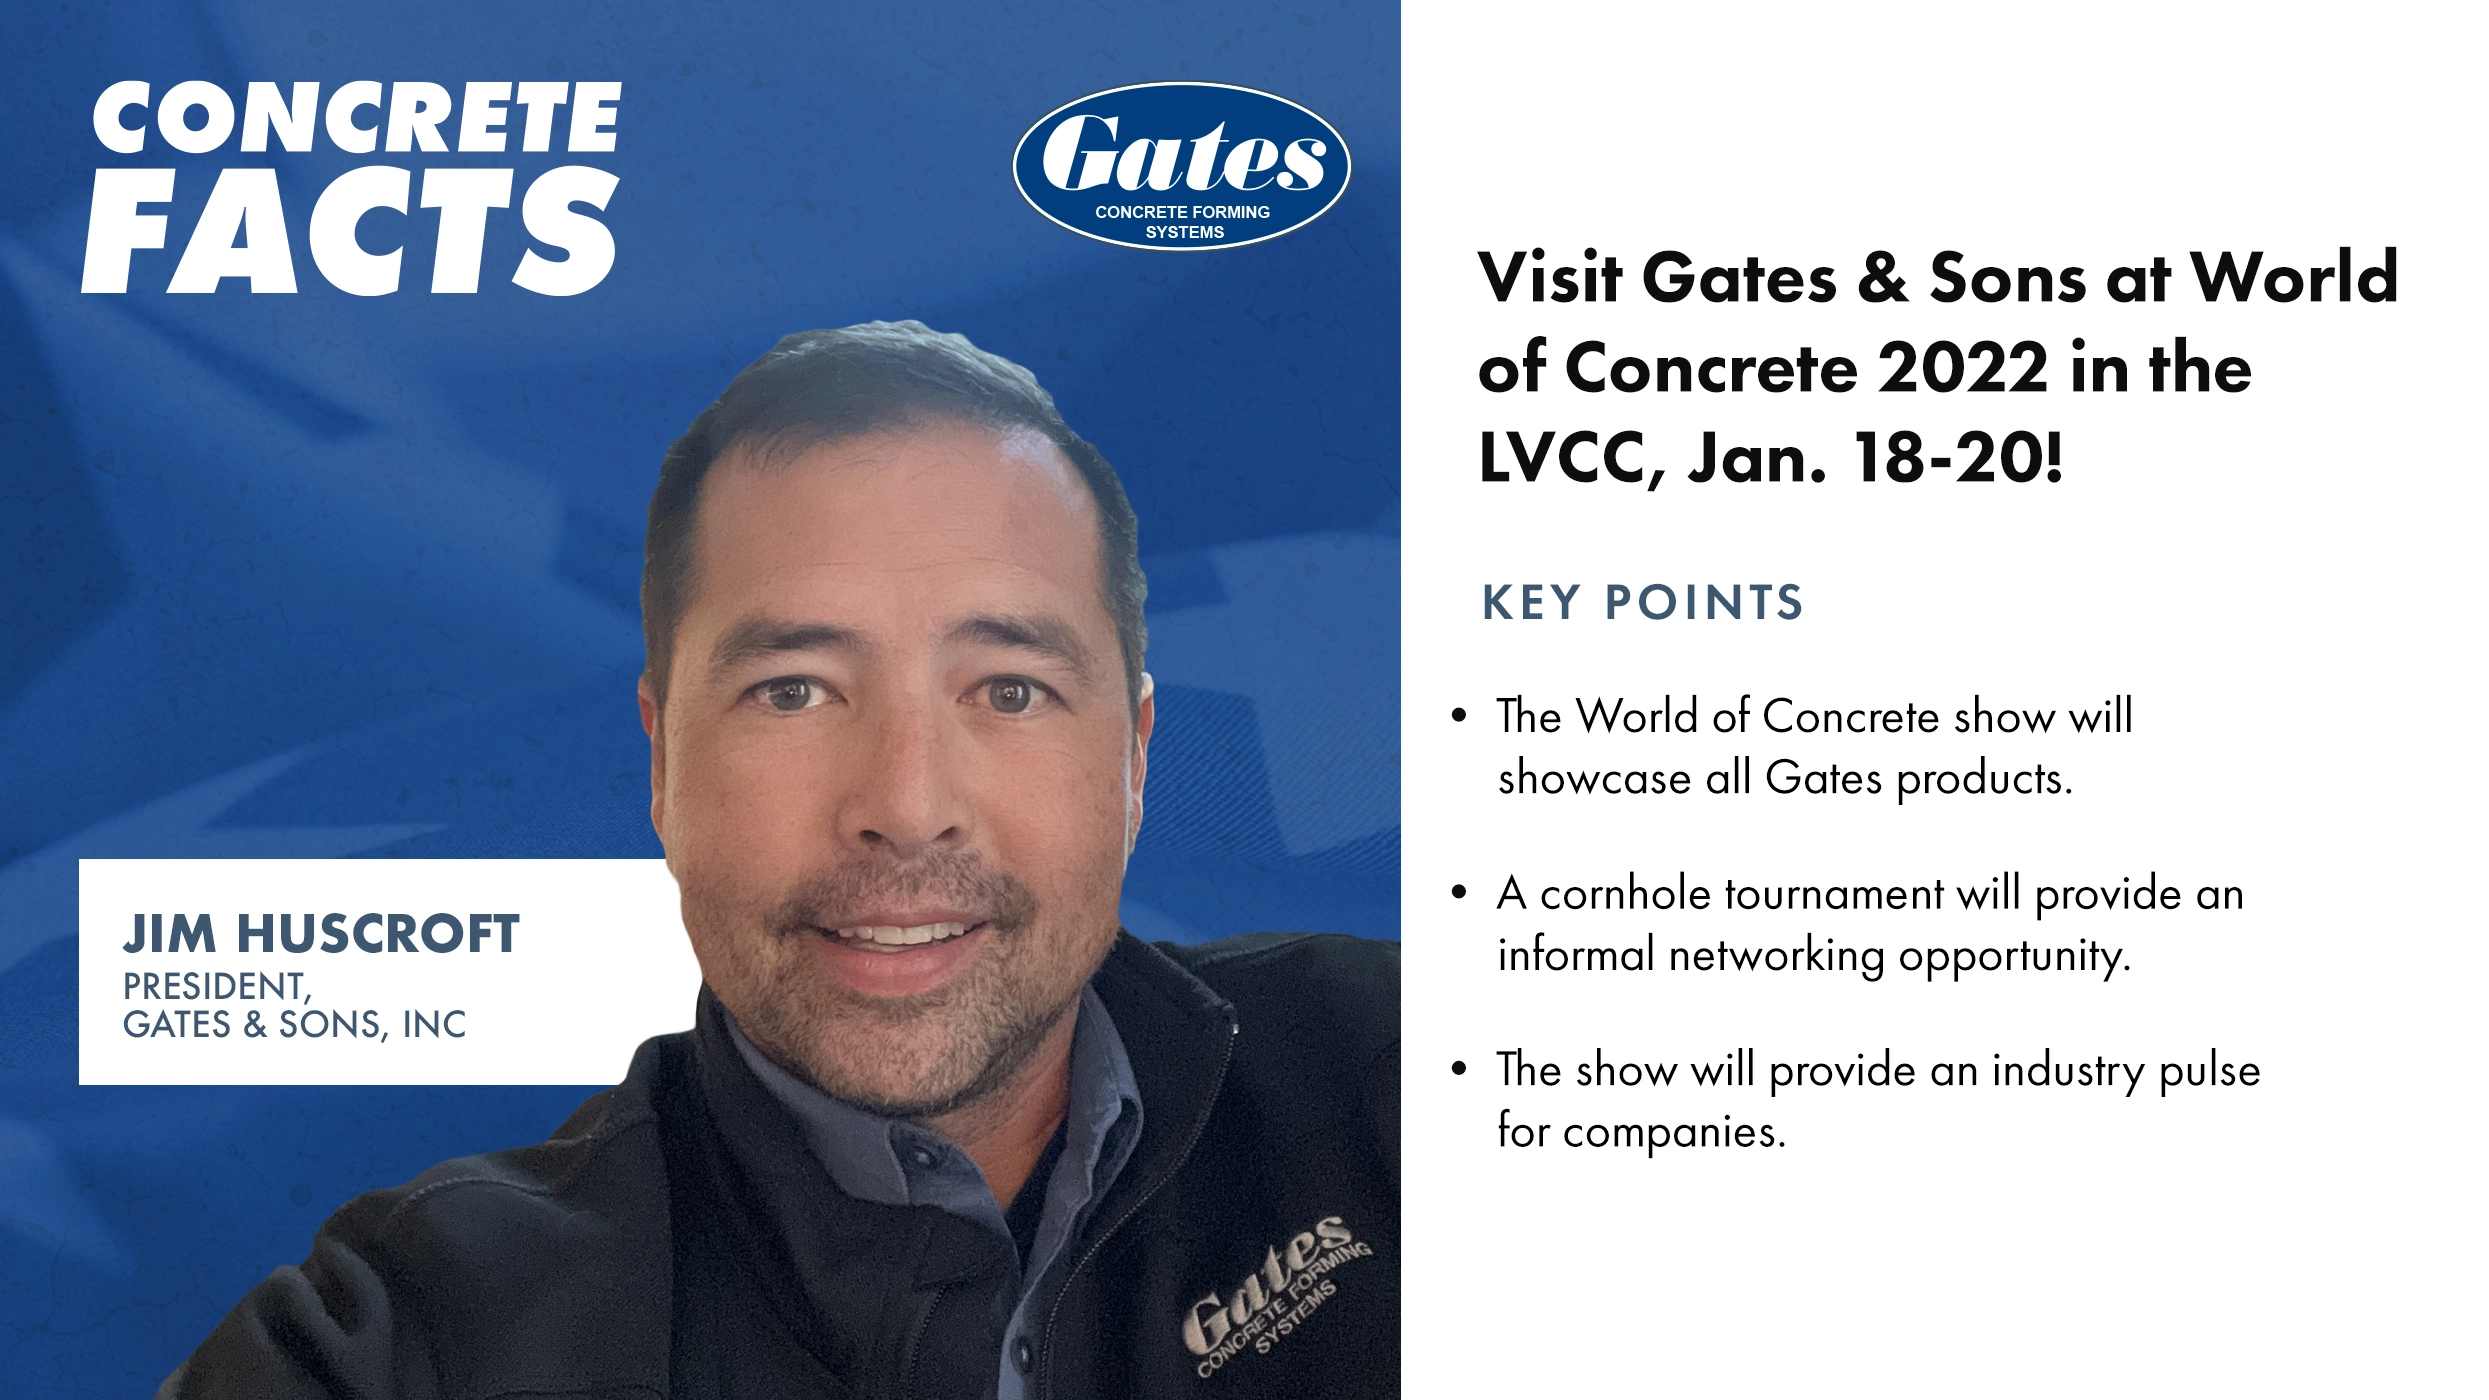 Visit Gates & Sons at World of Concrete 2022 in the LVCC, Jan. 18-20!